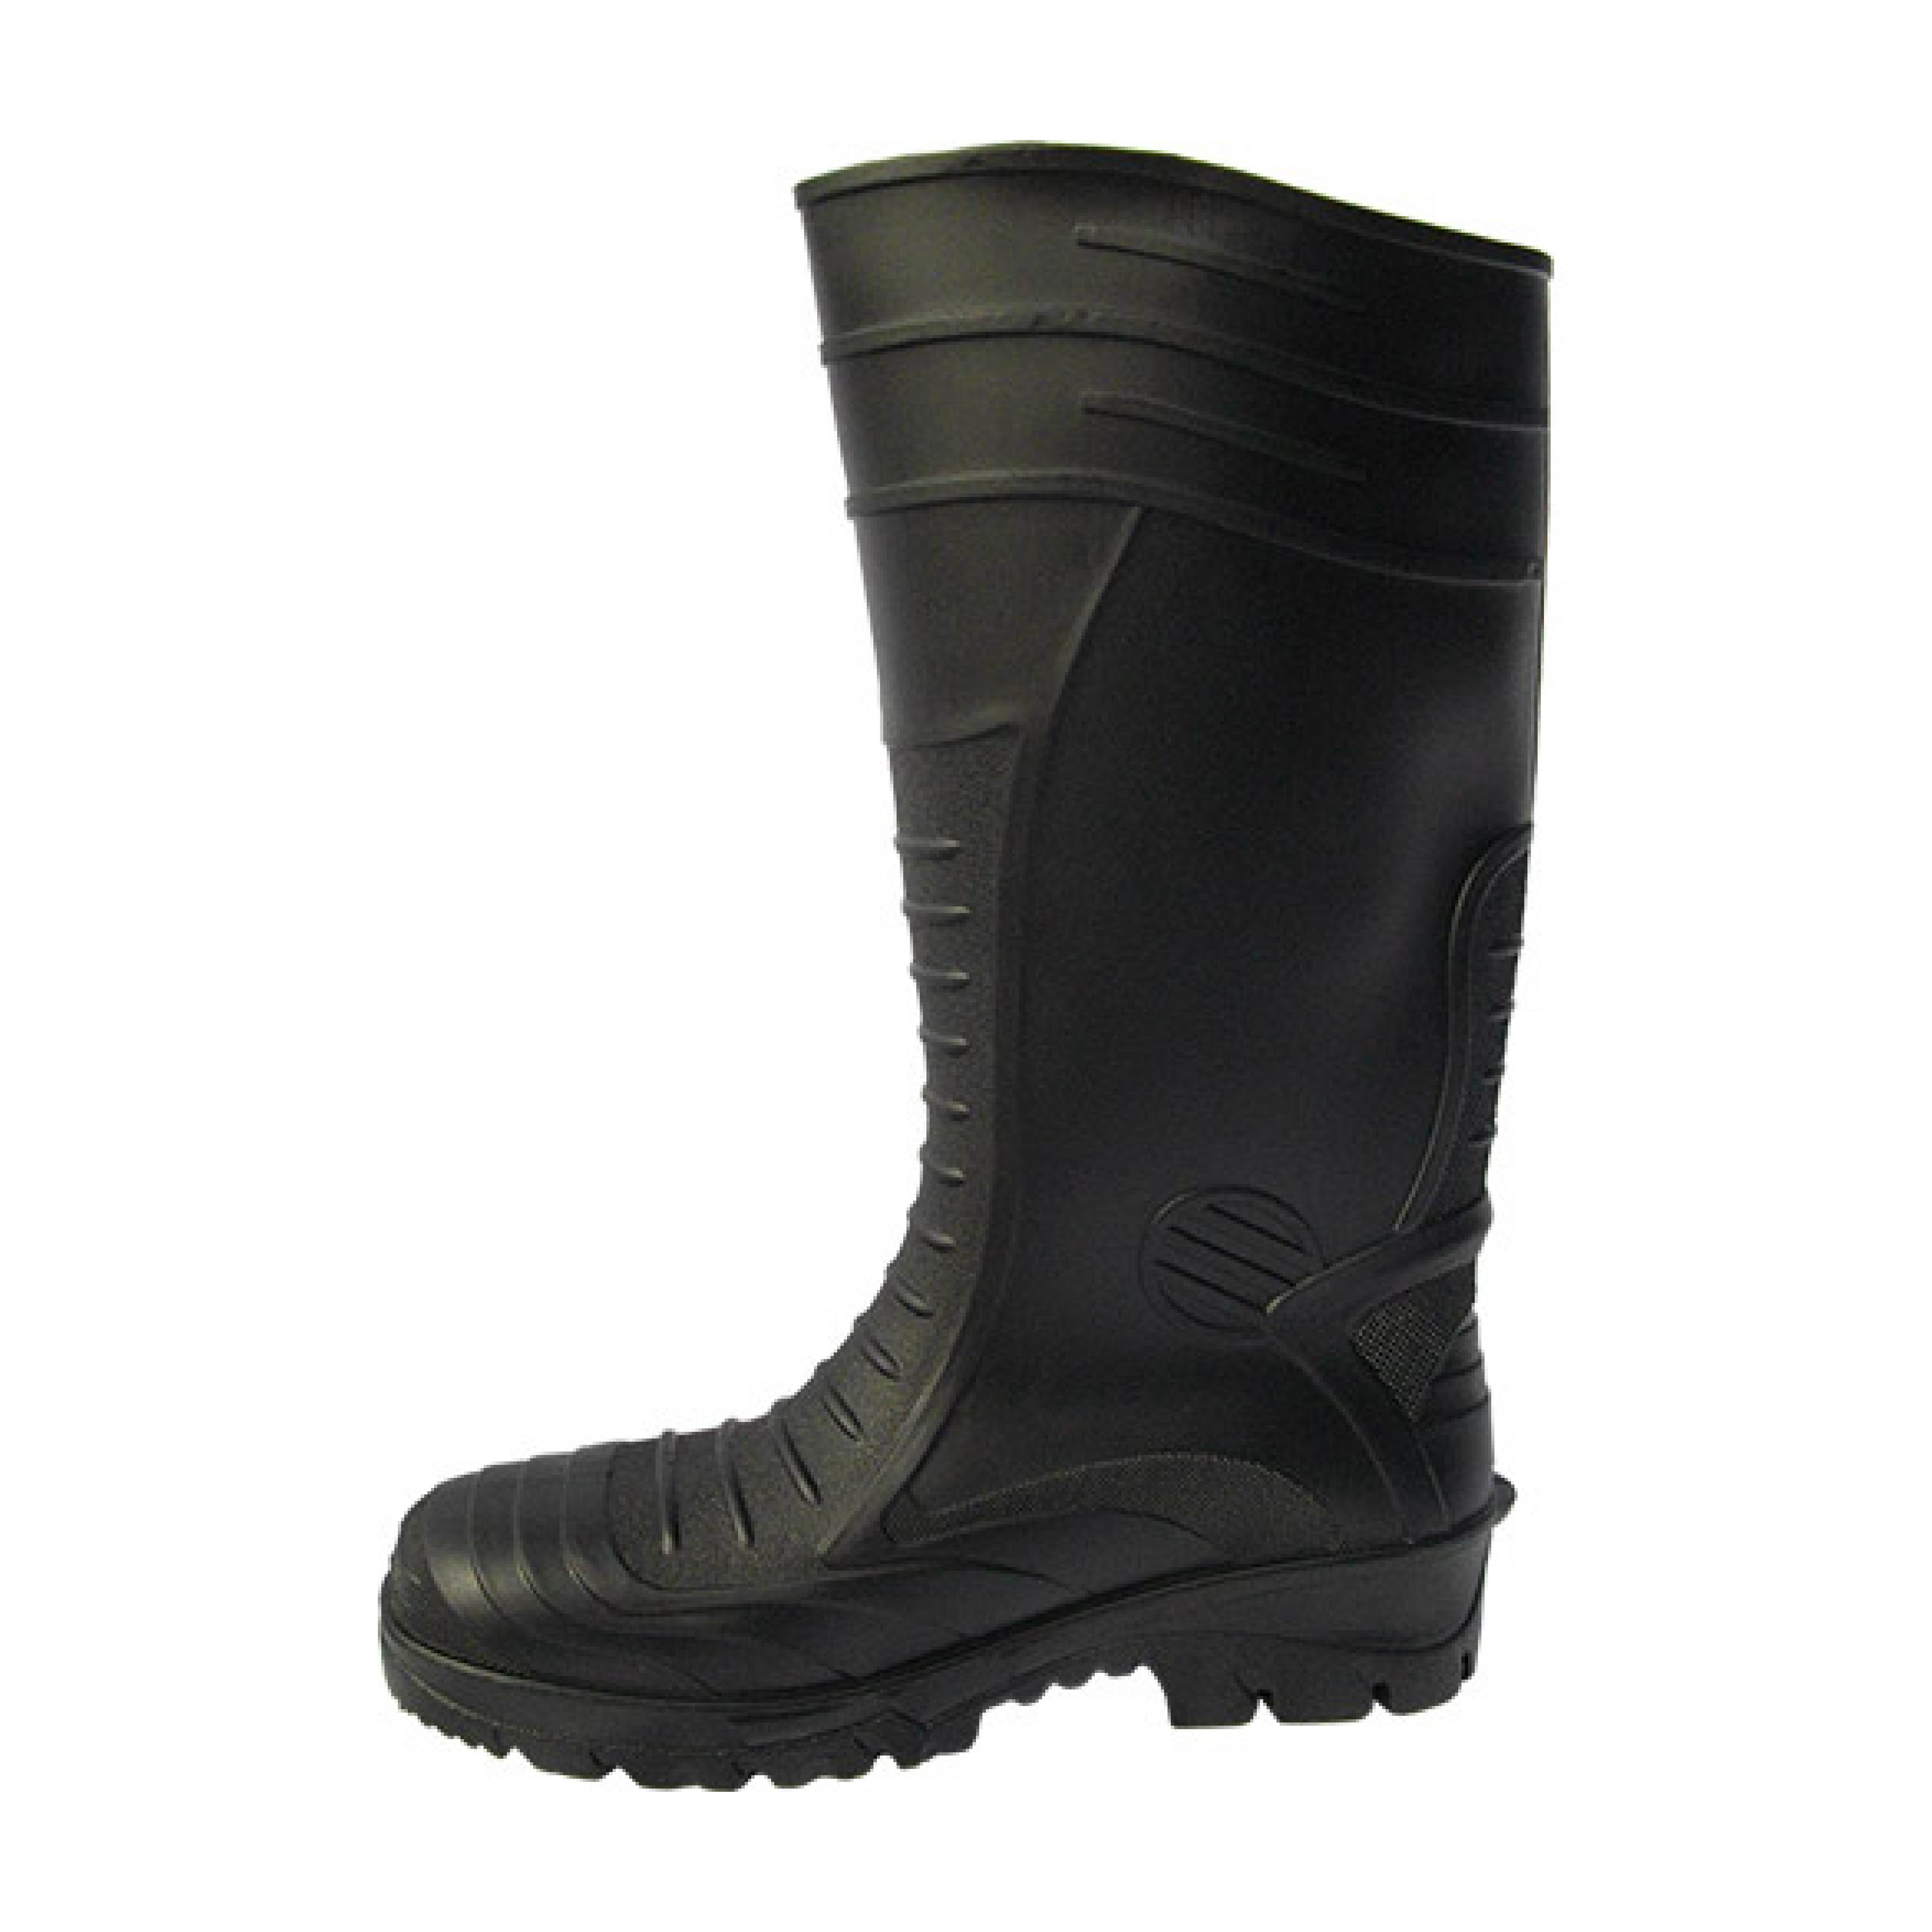 Black PVC Safety Gumboot Mens Size 9 (1 pair)